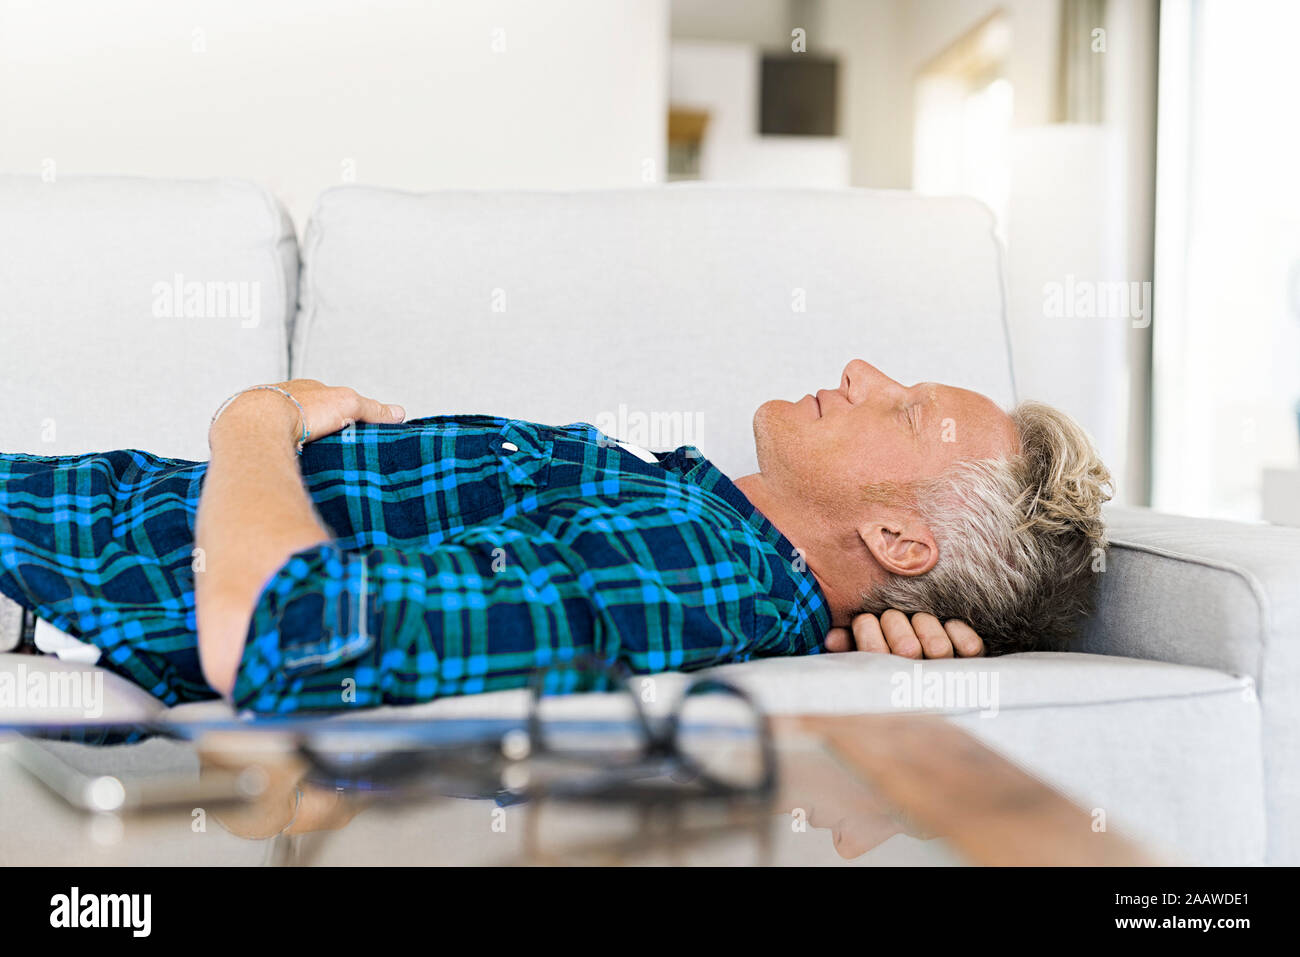 Casual man lying on couch relaxing Banque D'Images